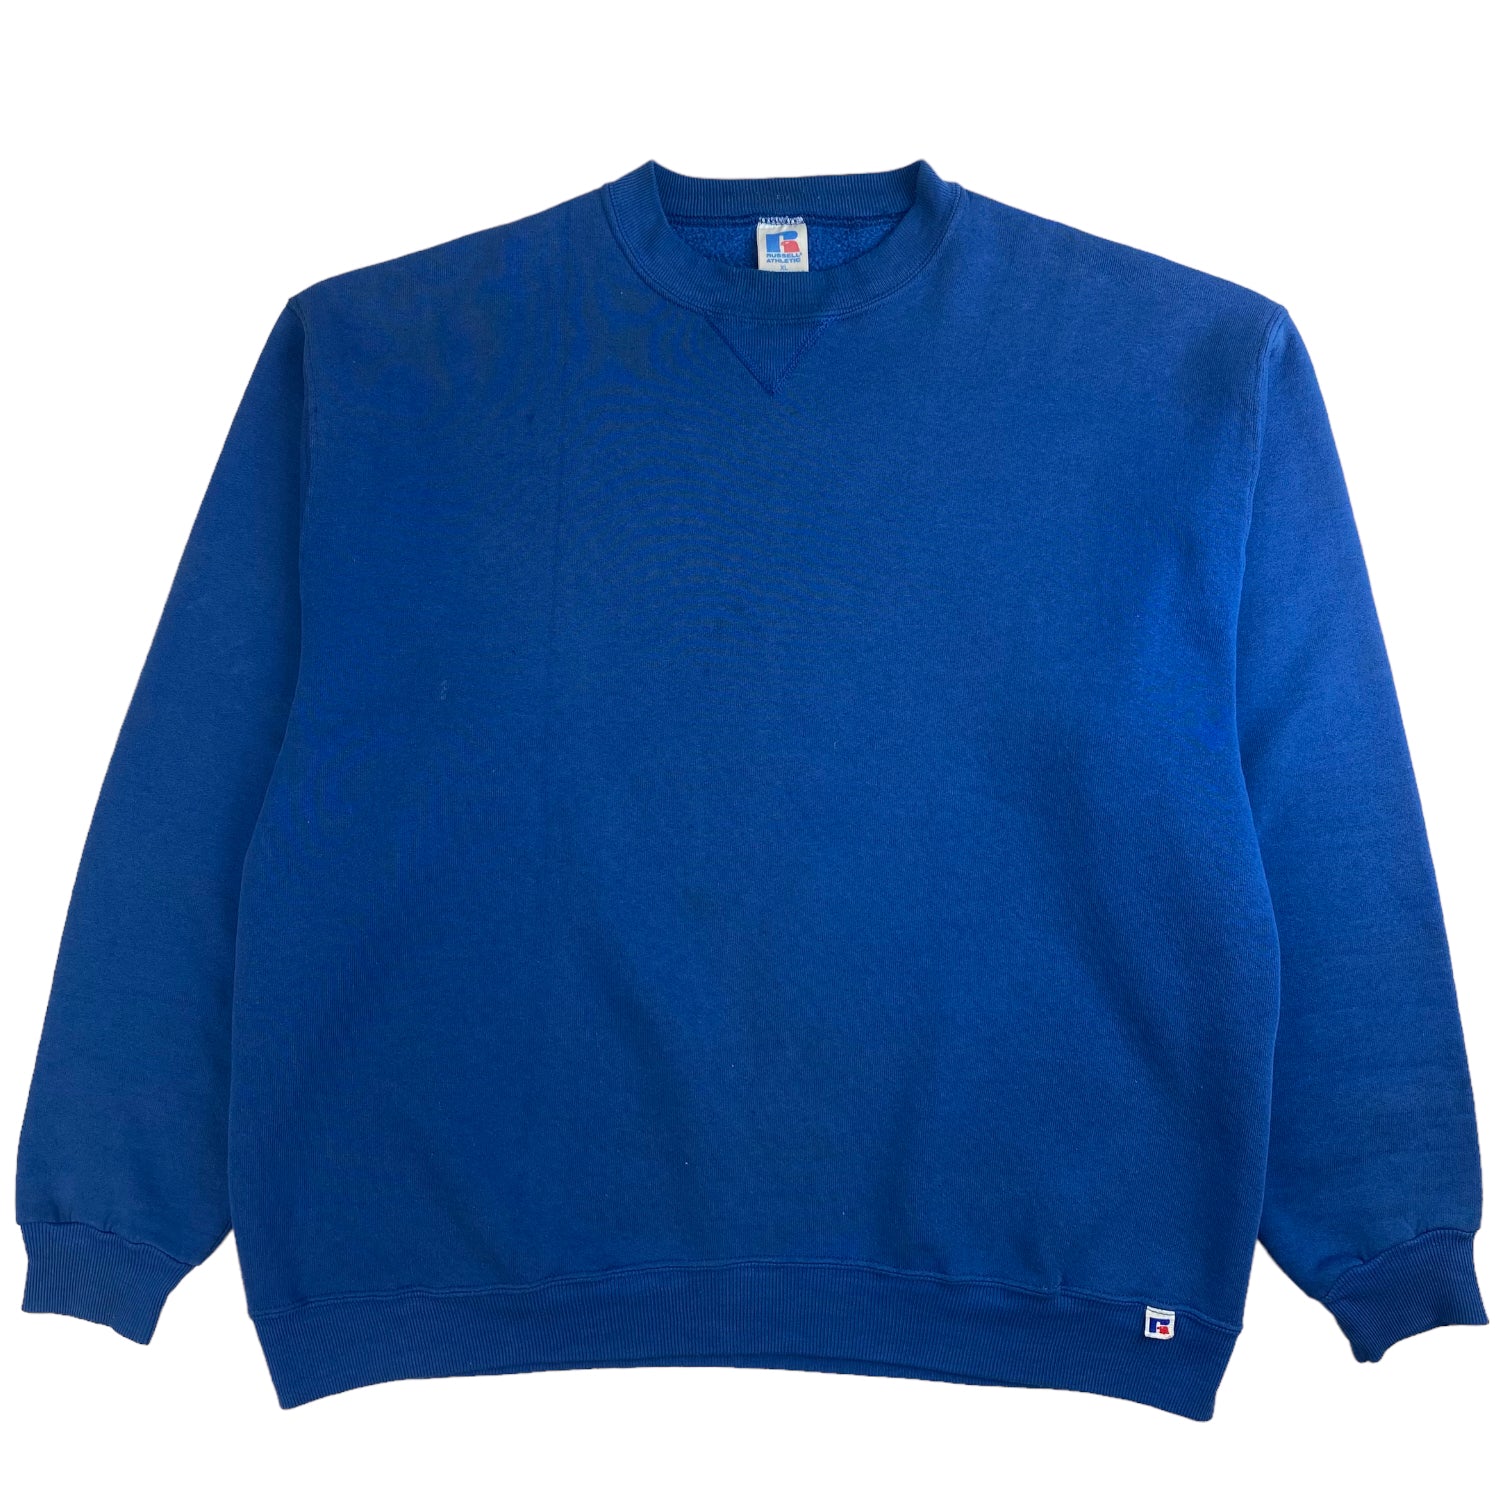 Vintage Russell Athletic Blank Crewneck Washed Navy